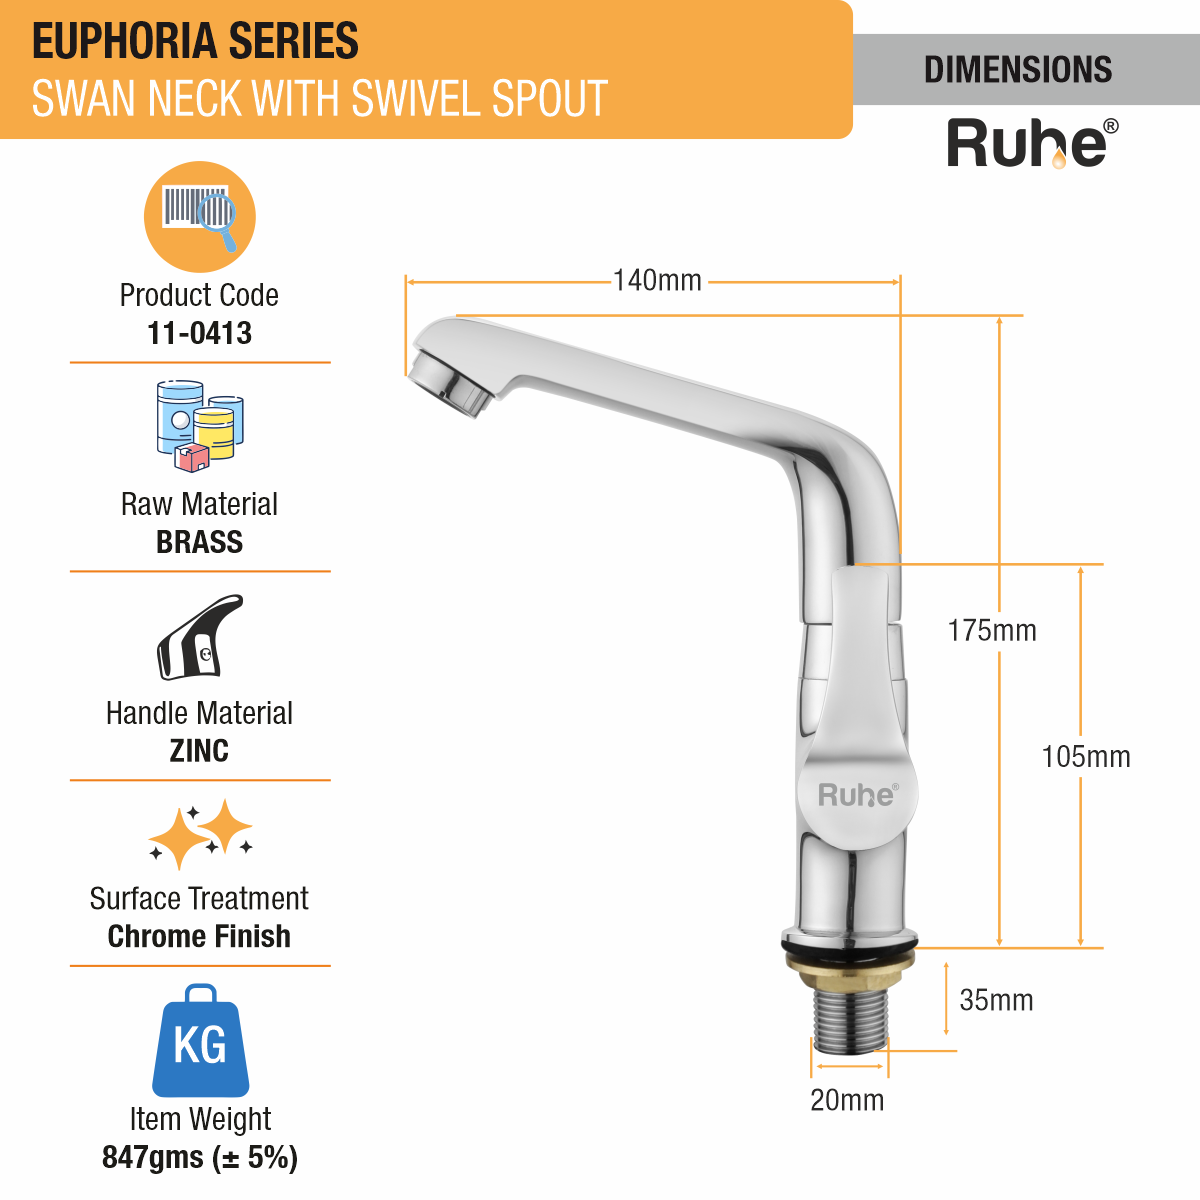 Euphoria Swan Neck With Swivel Spout Faucet dimensions and size